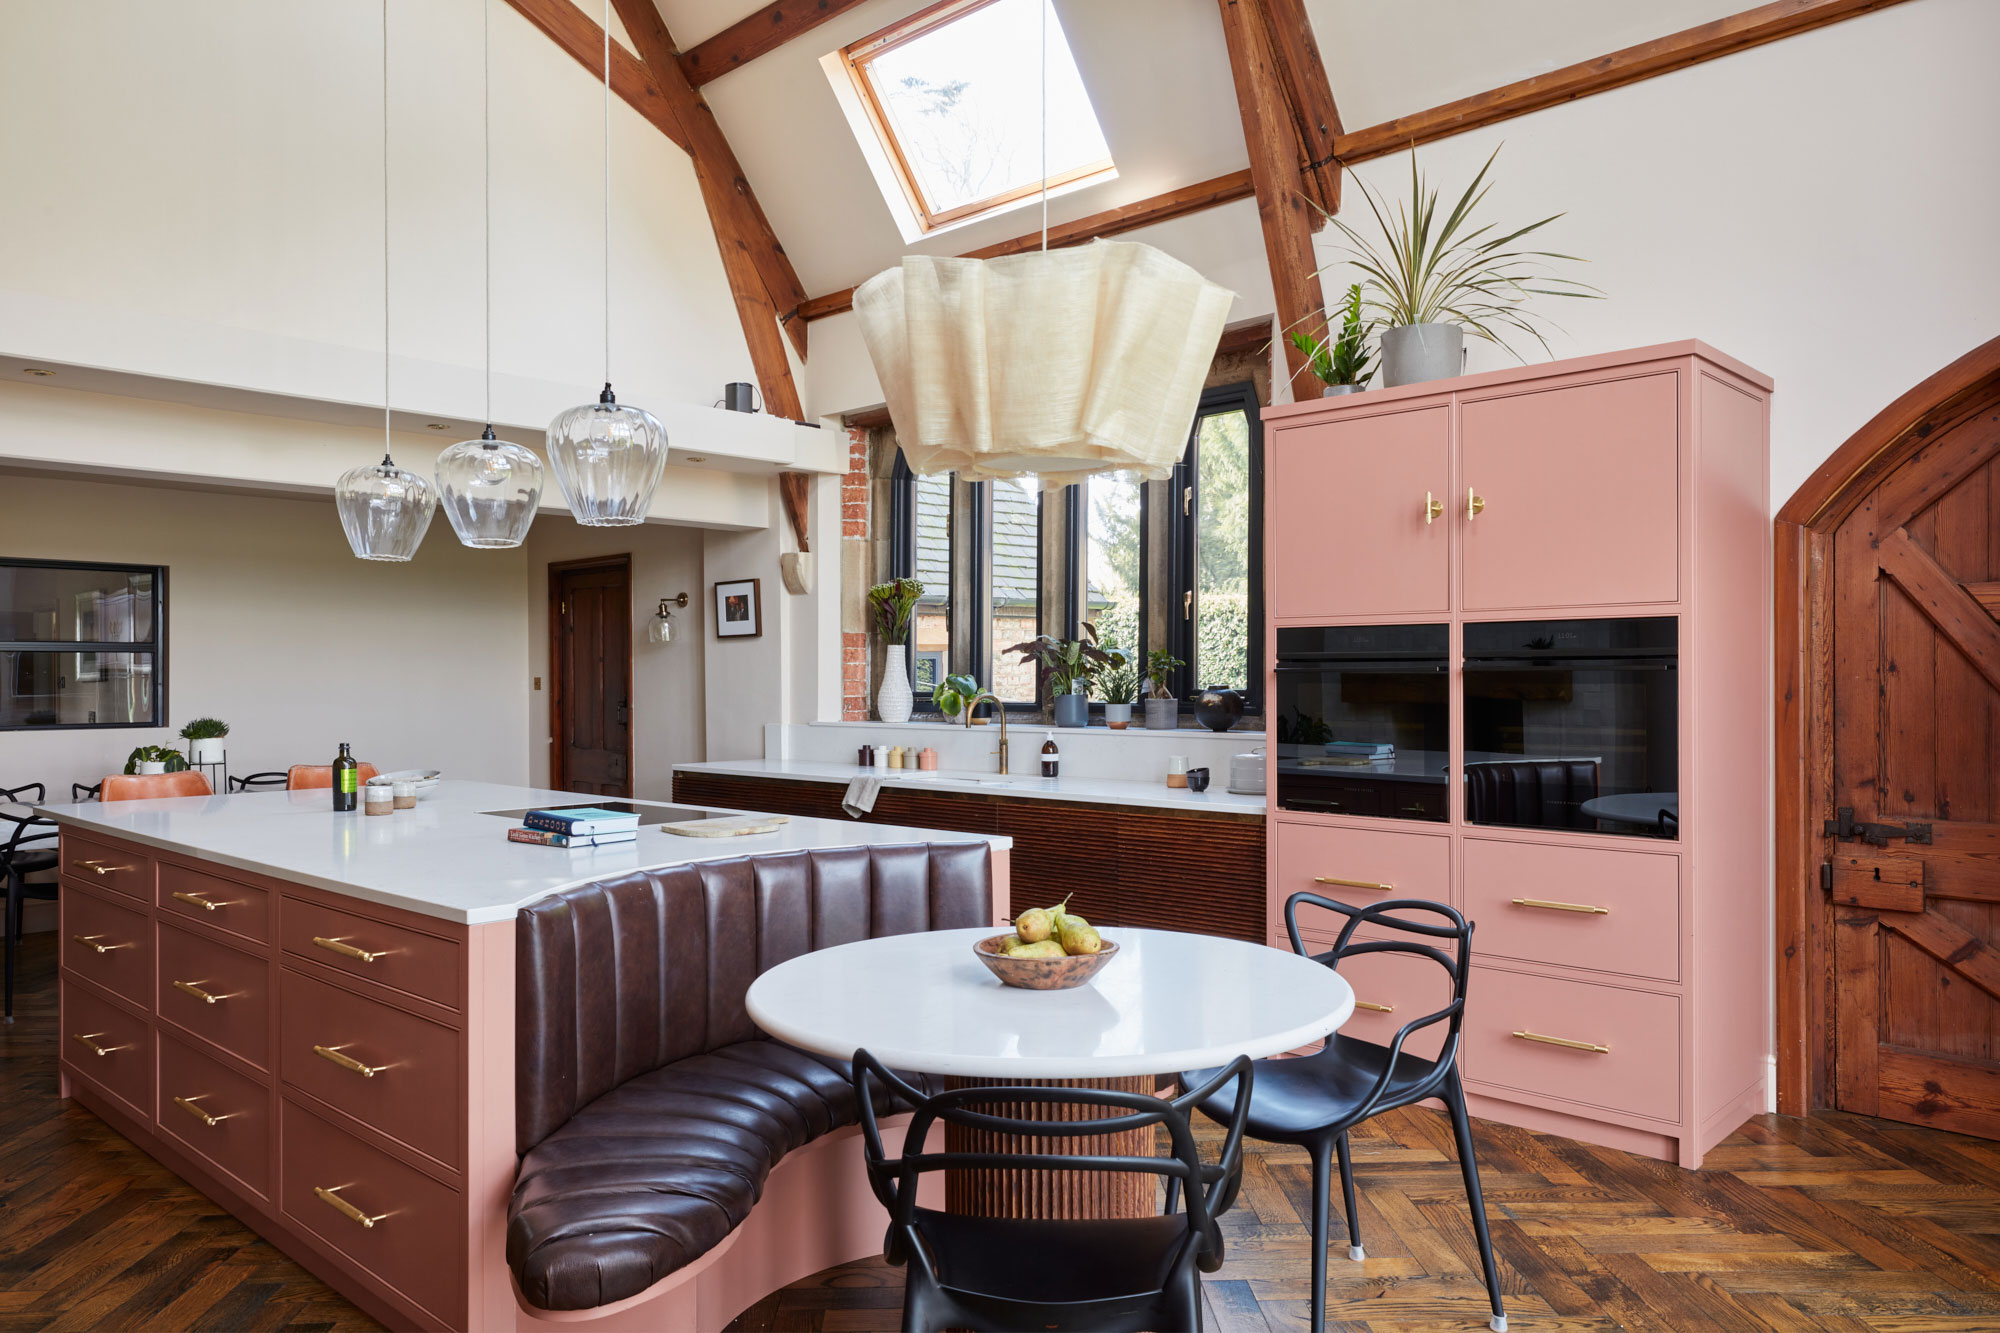 Open plan kitchen with large pink painted island